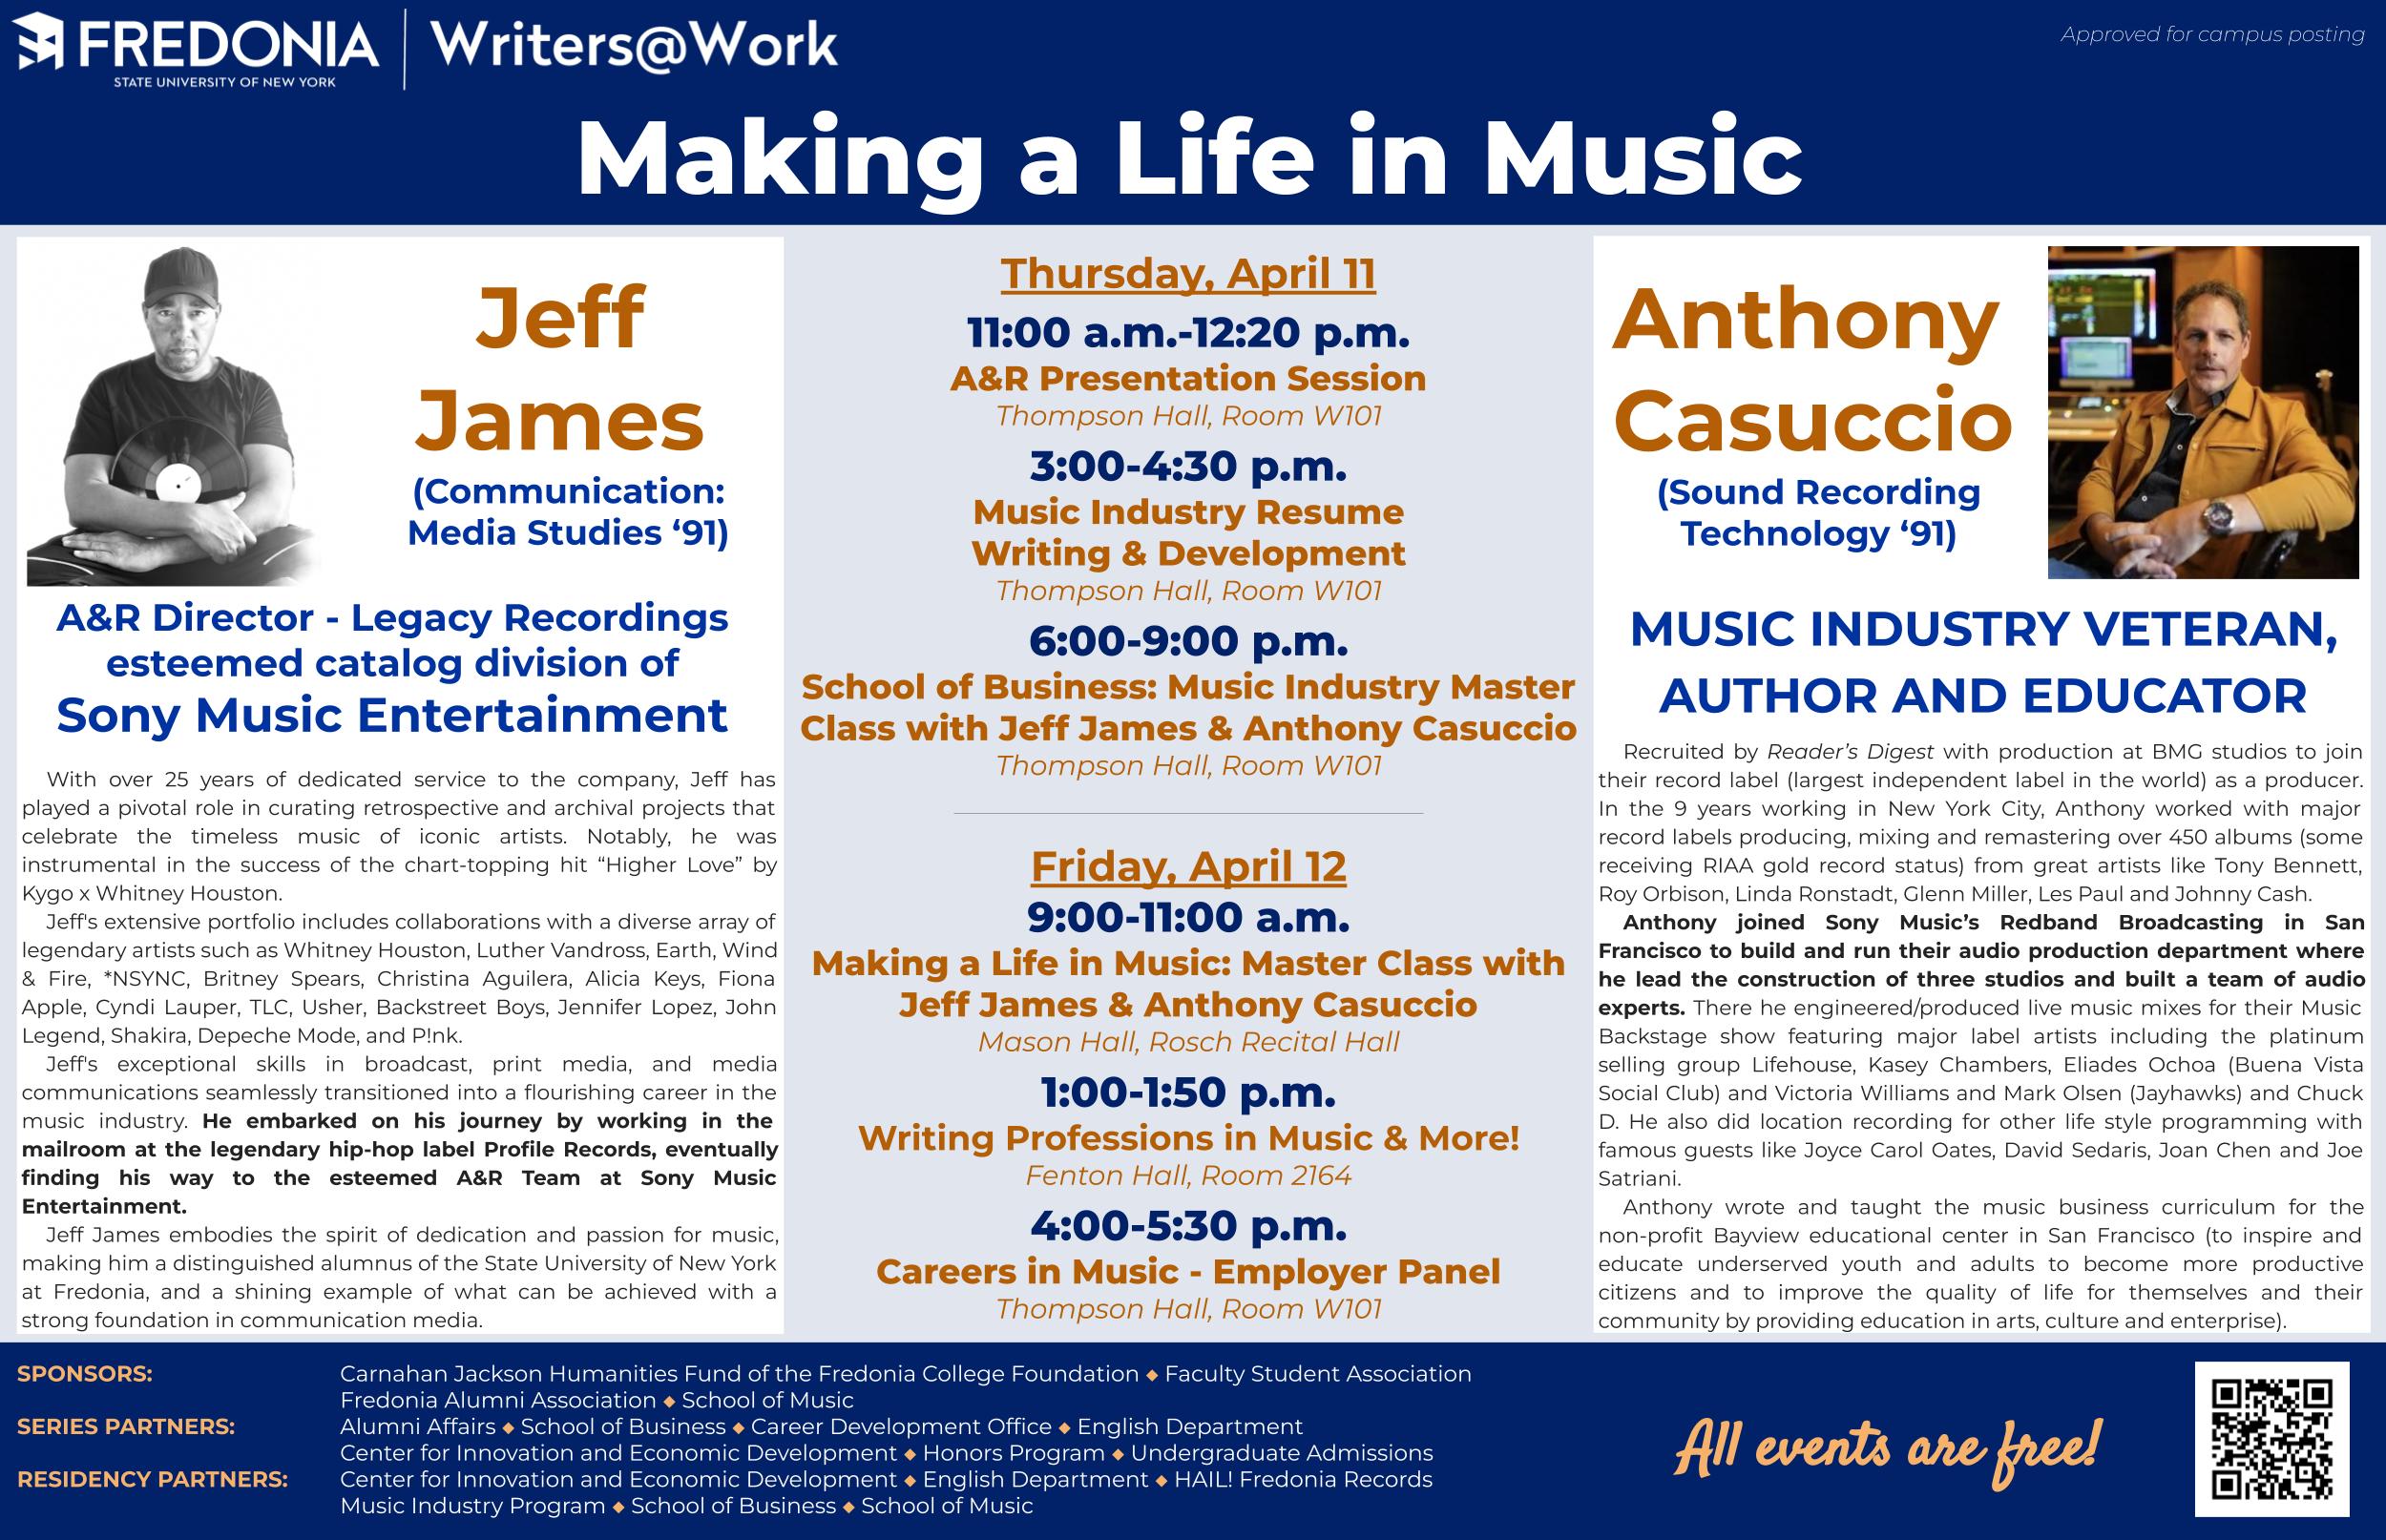 Writers @ Work Event Flyer - April 11-12